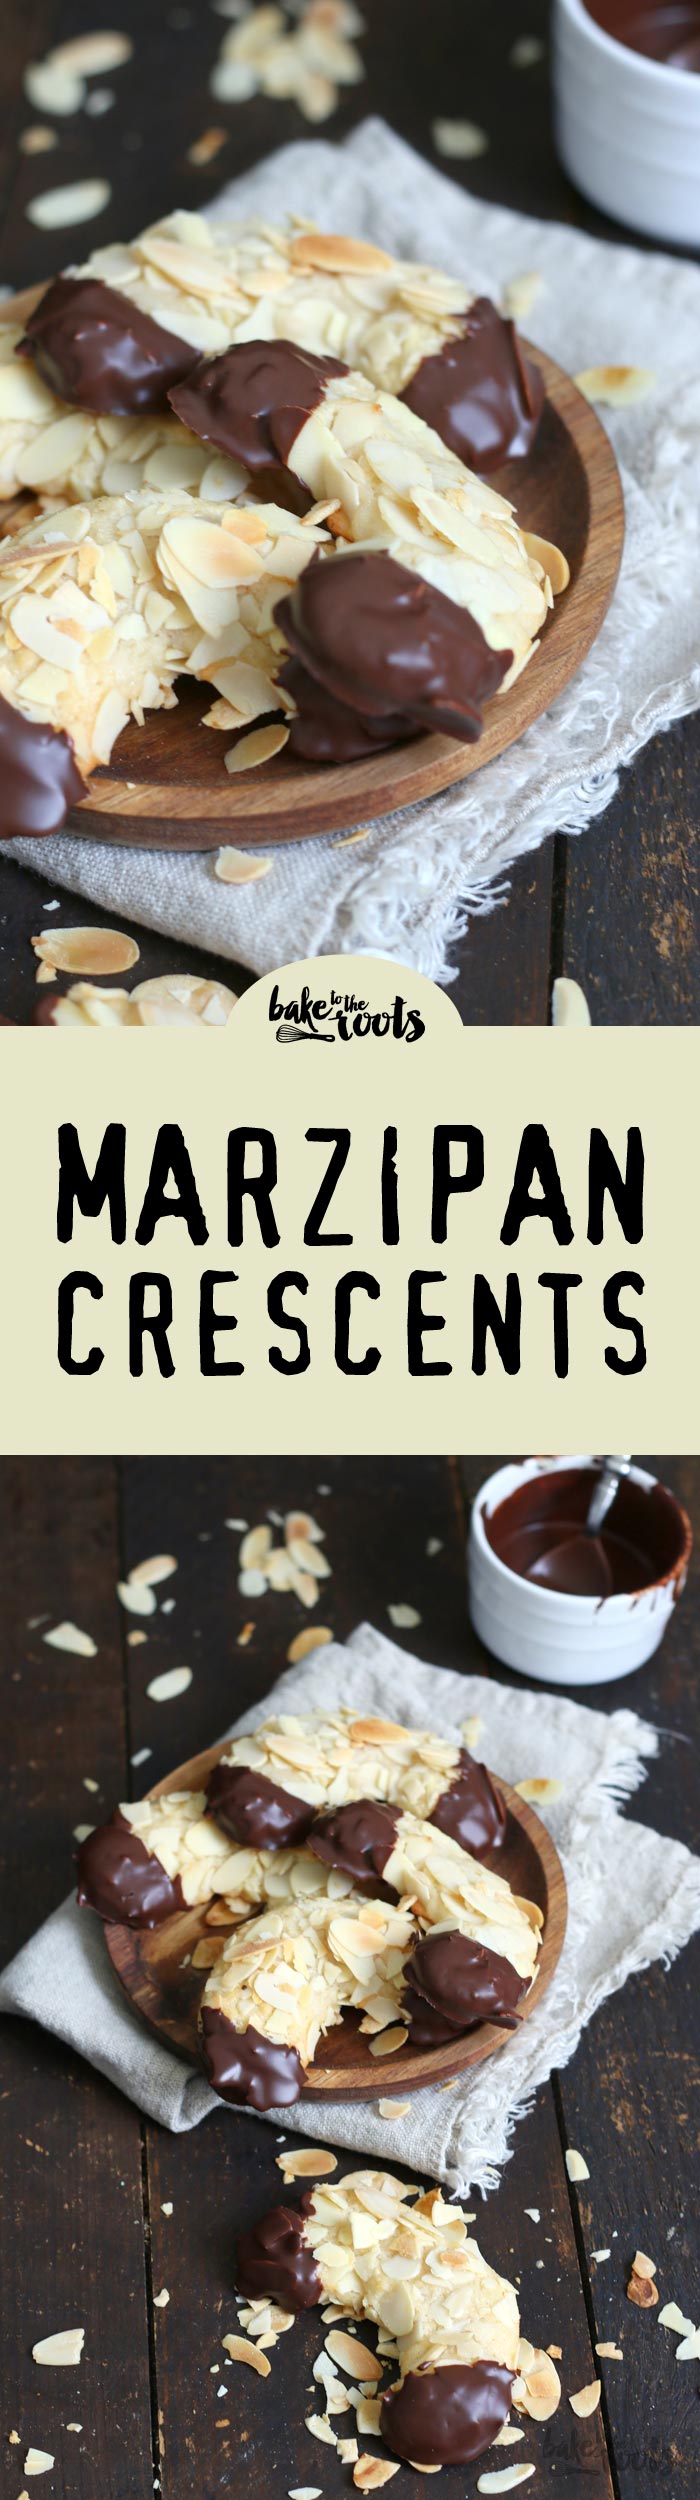 Almond Marzipan Crescents | Bake to the roots